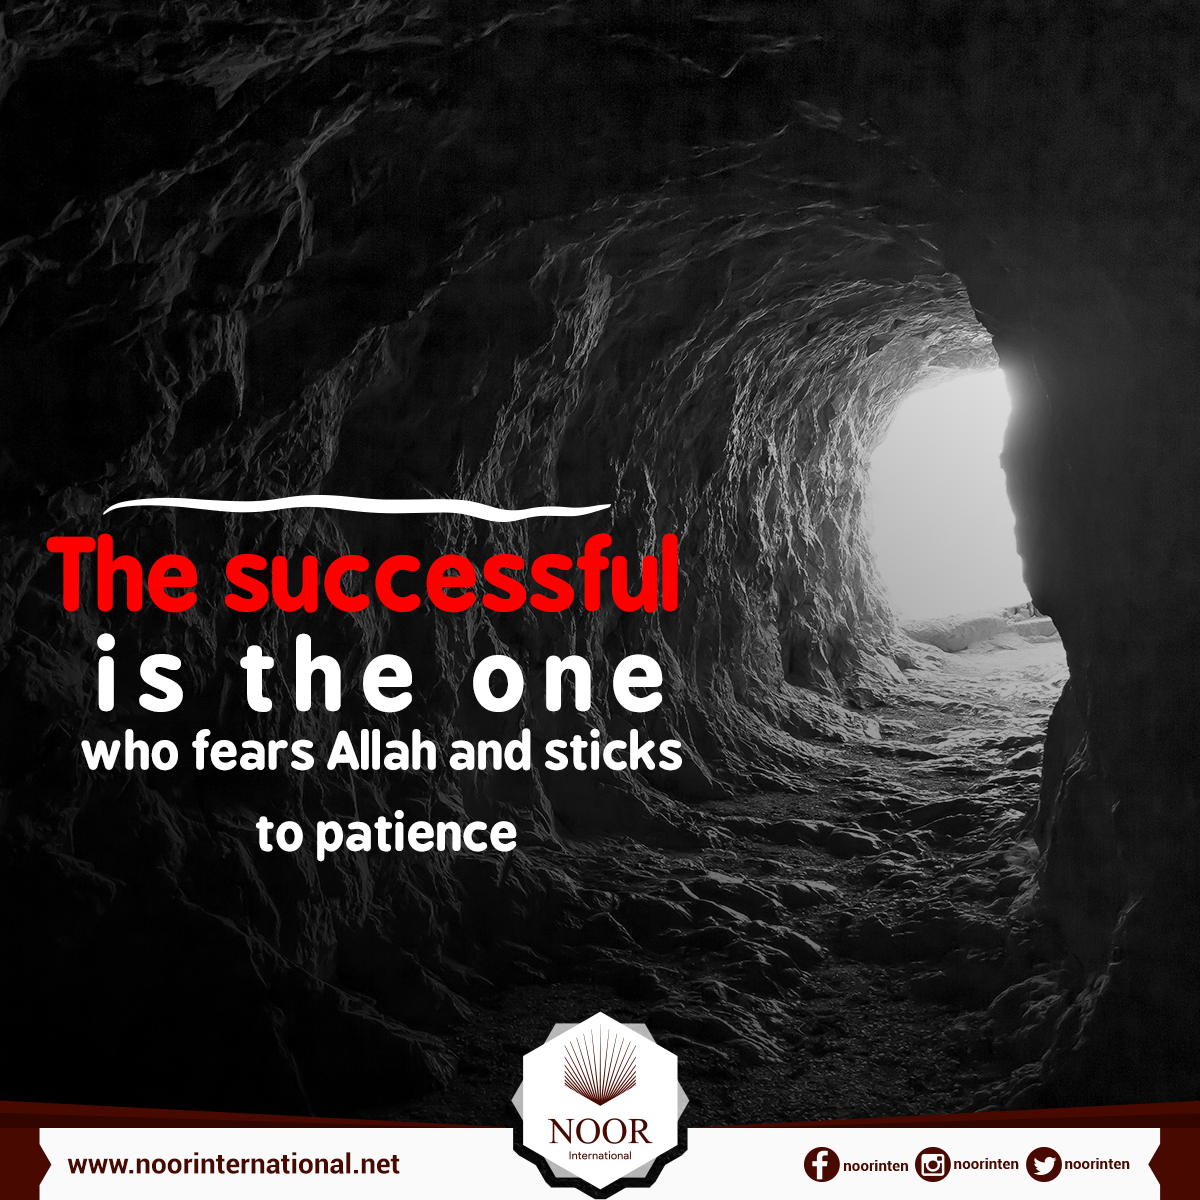 The successful is the one who fears Allah and sticks to patience